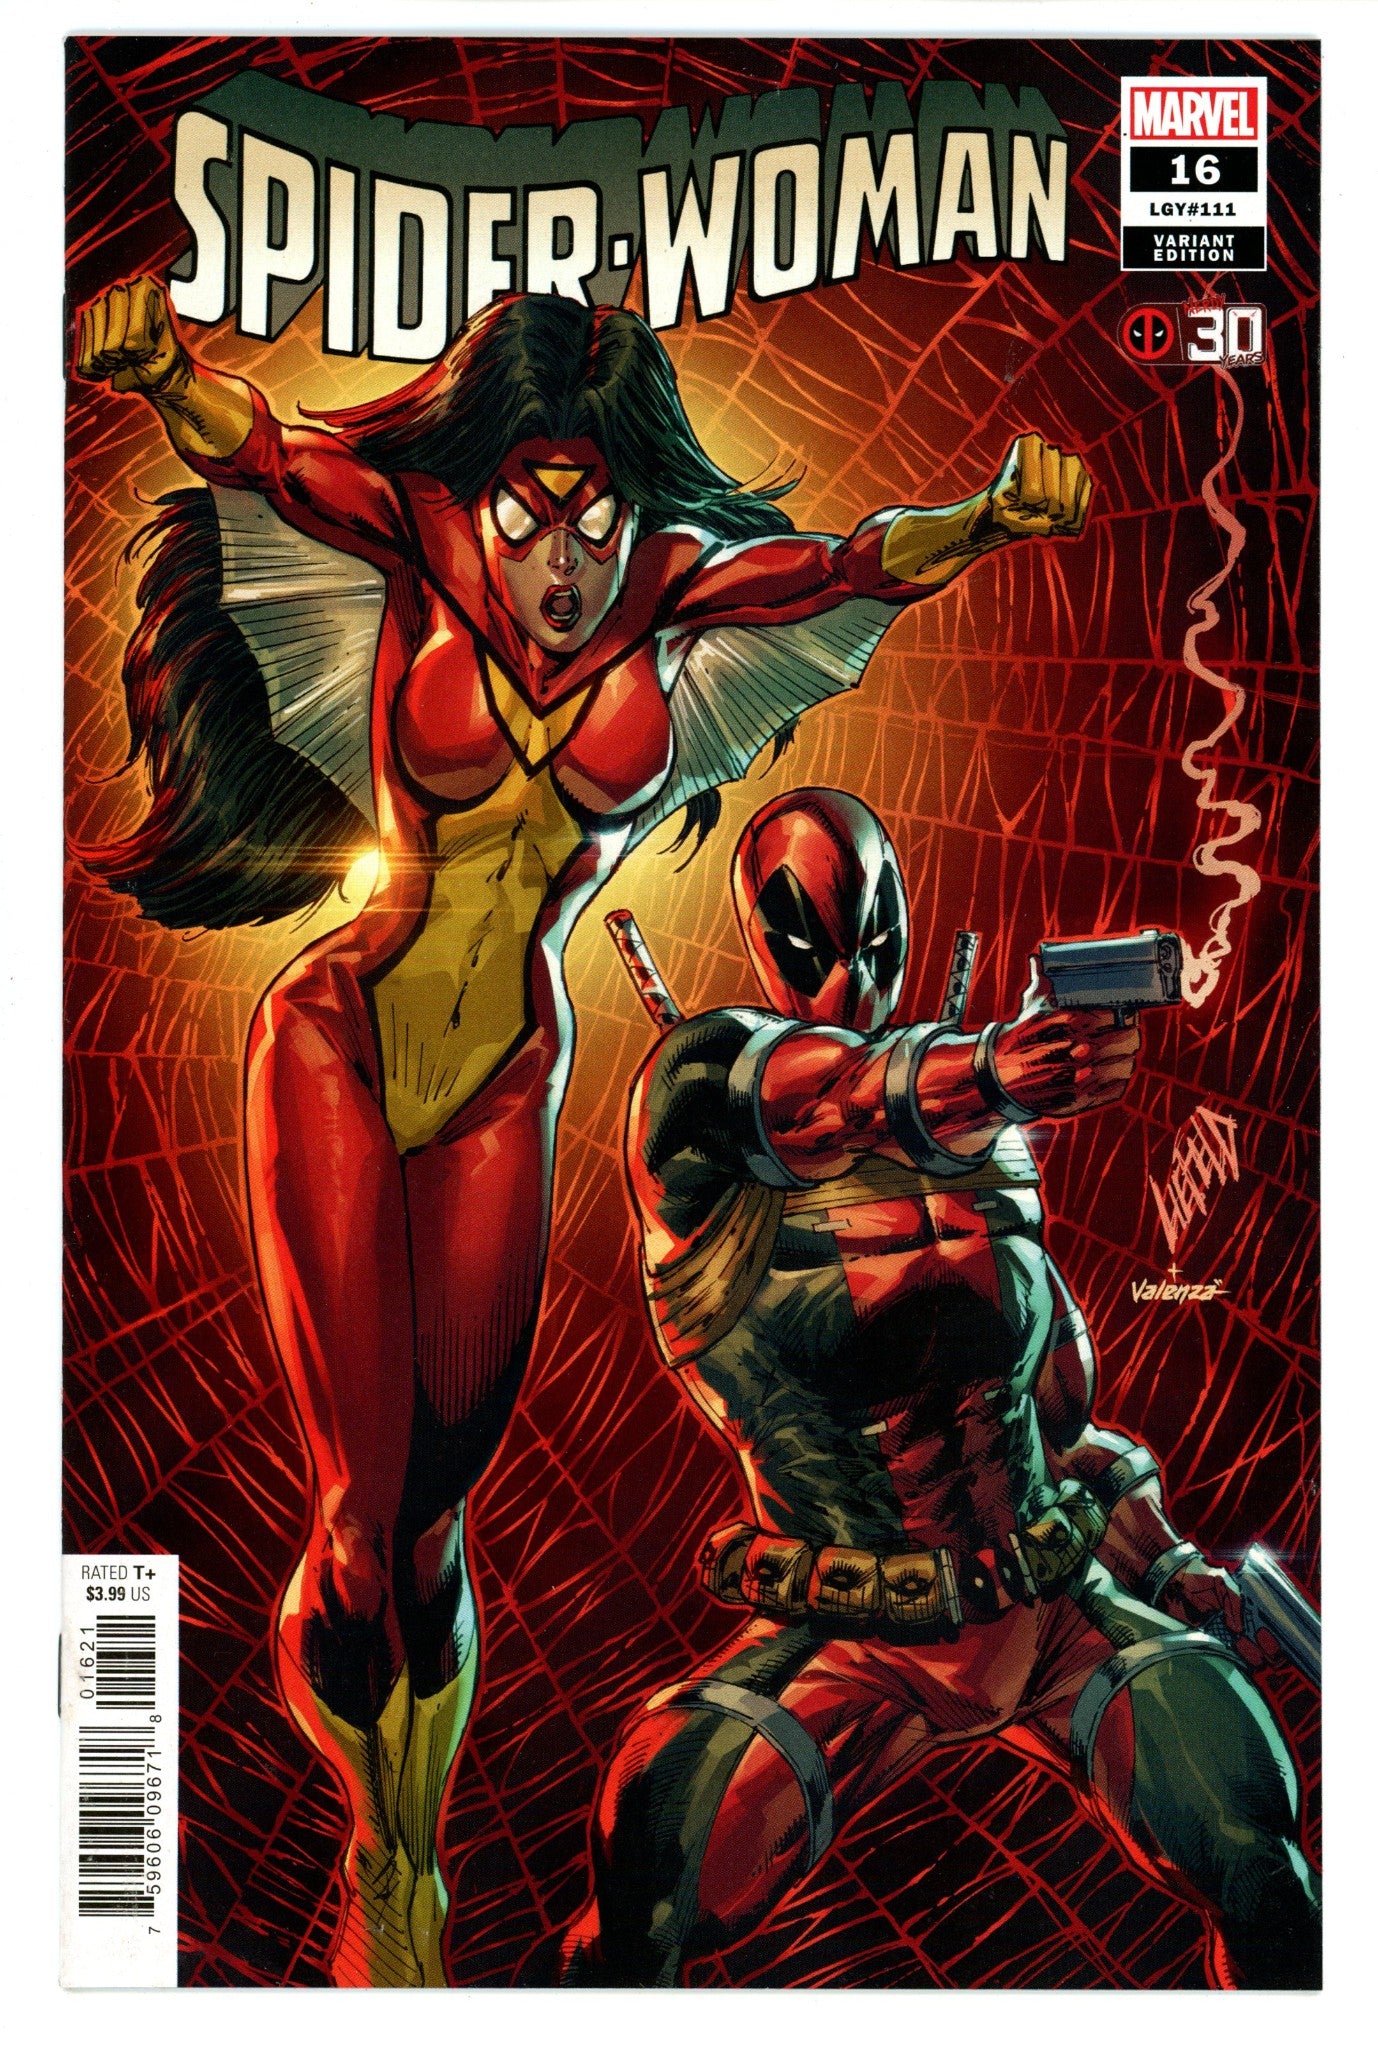 Spider-Woman Vol 7 16 High Grade (2021) Liefeld Variant 